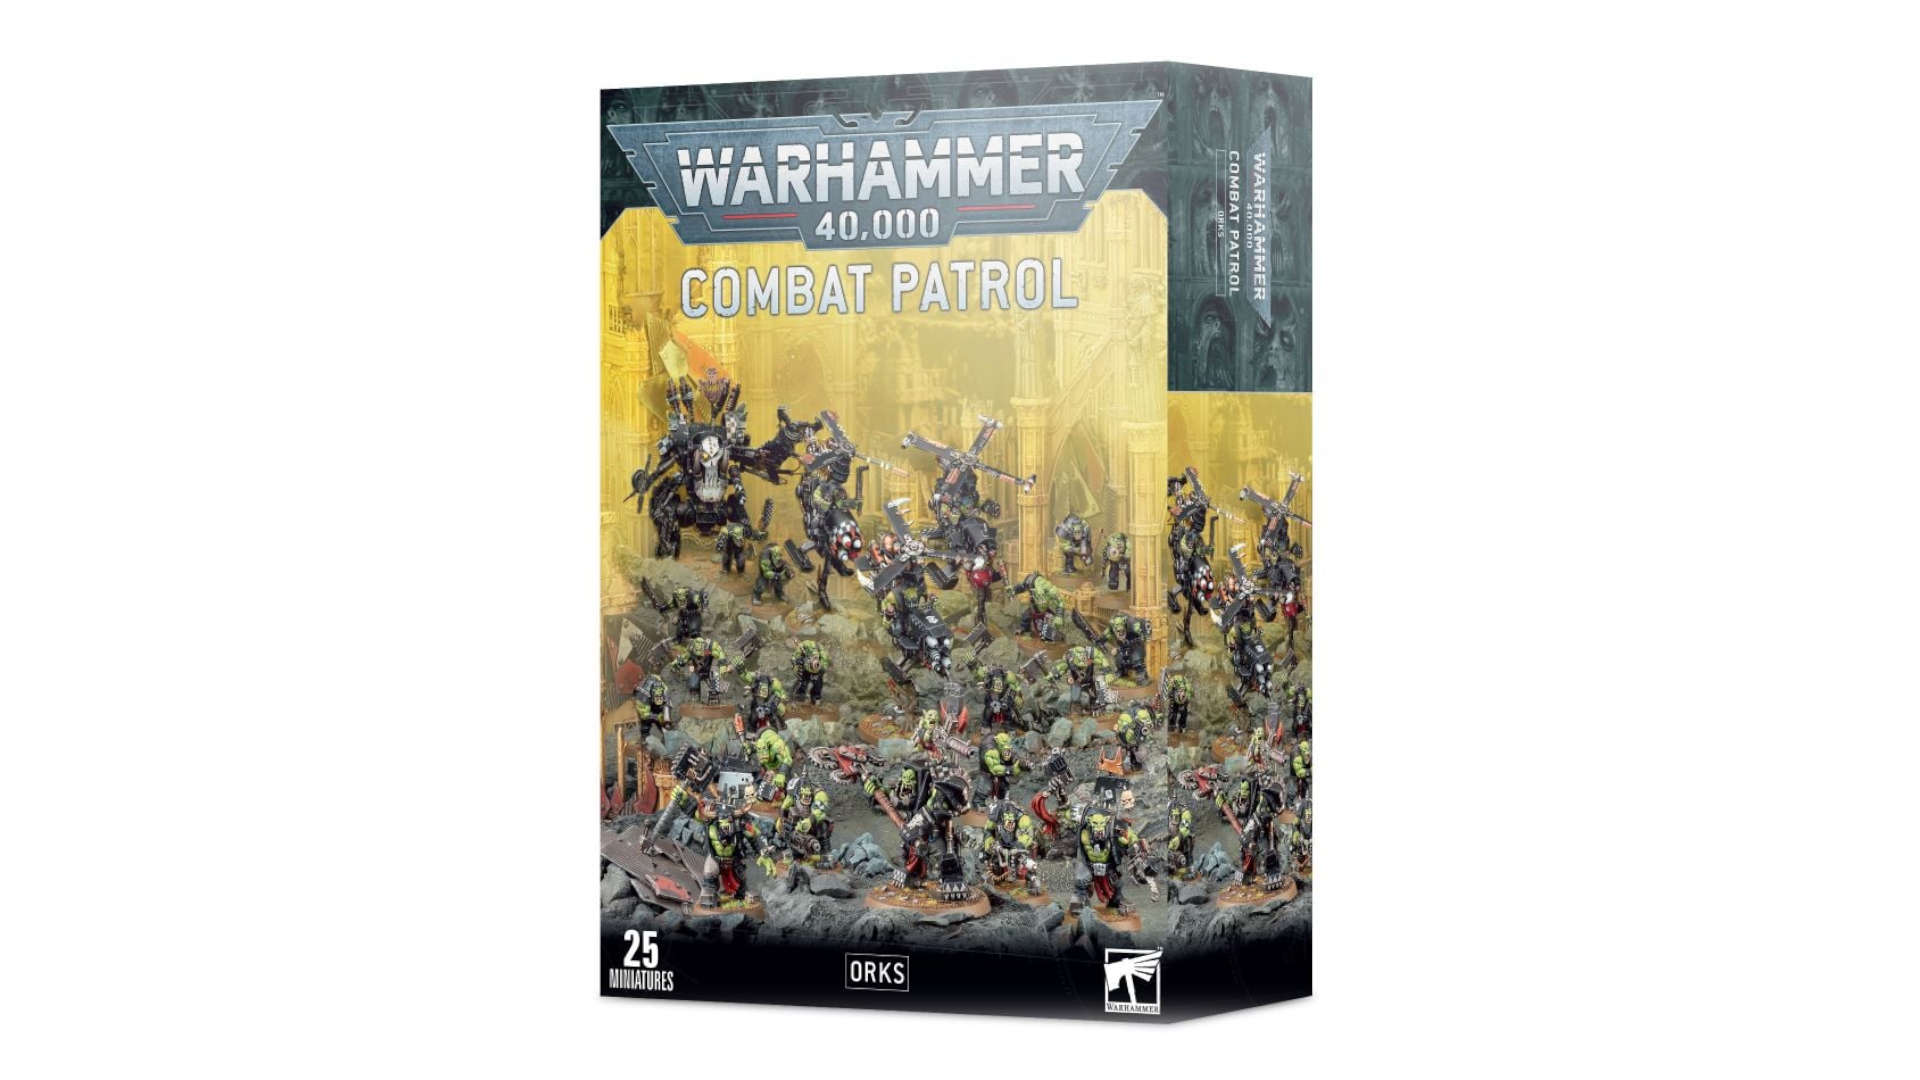 Warhammer 40k games director job listing - Combat Patrol product photo by Games Workshop, a box advertising Ork miniatures